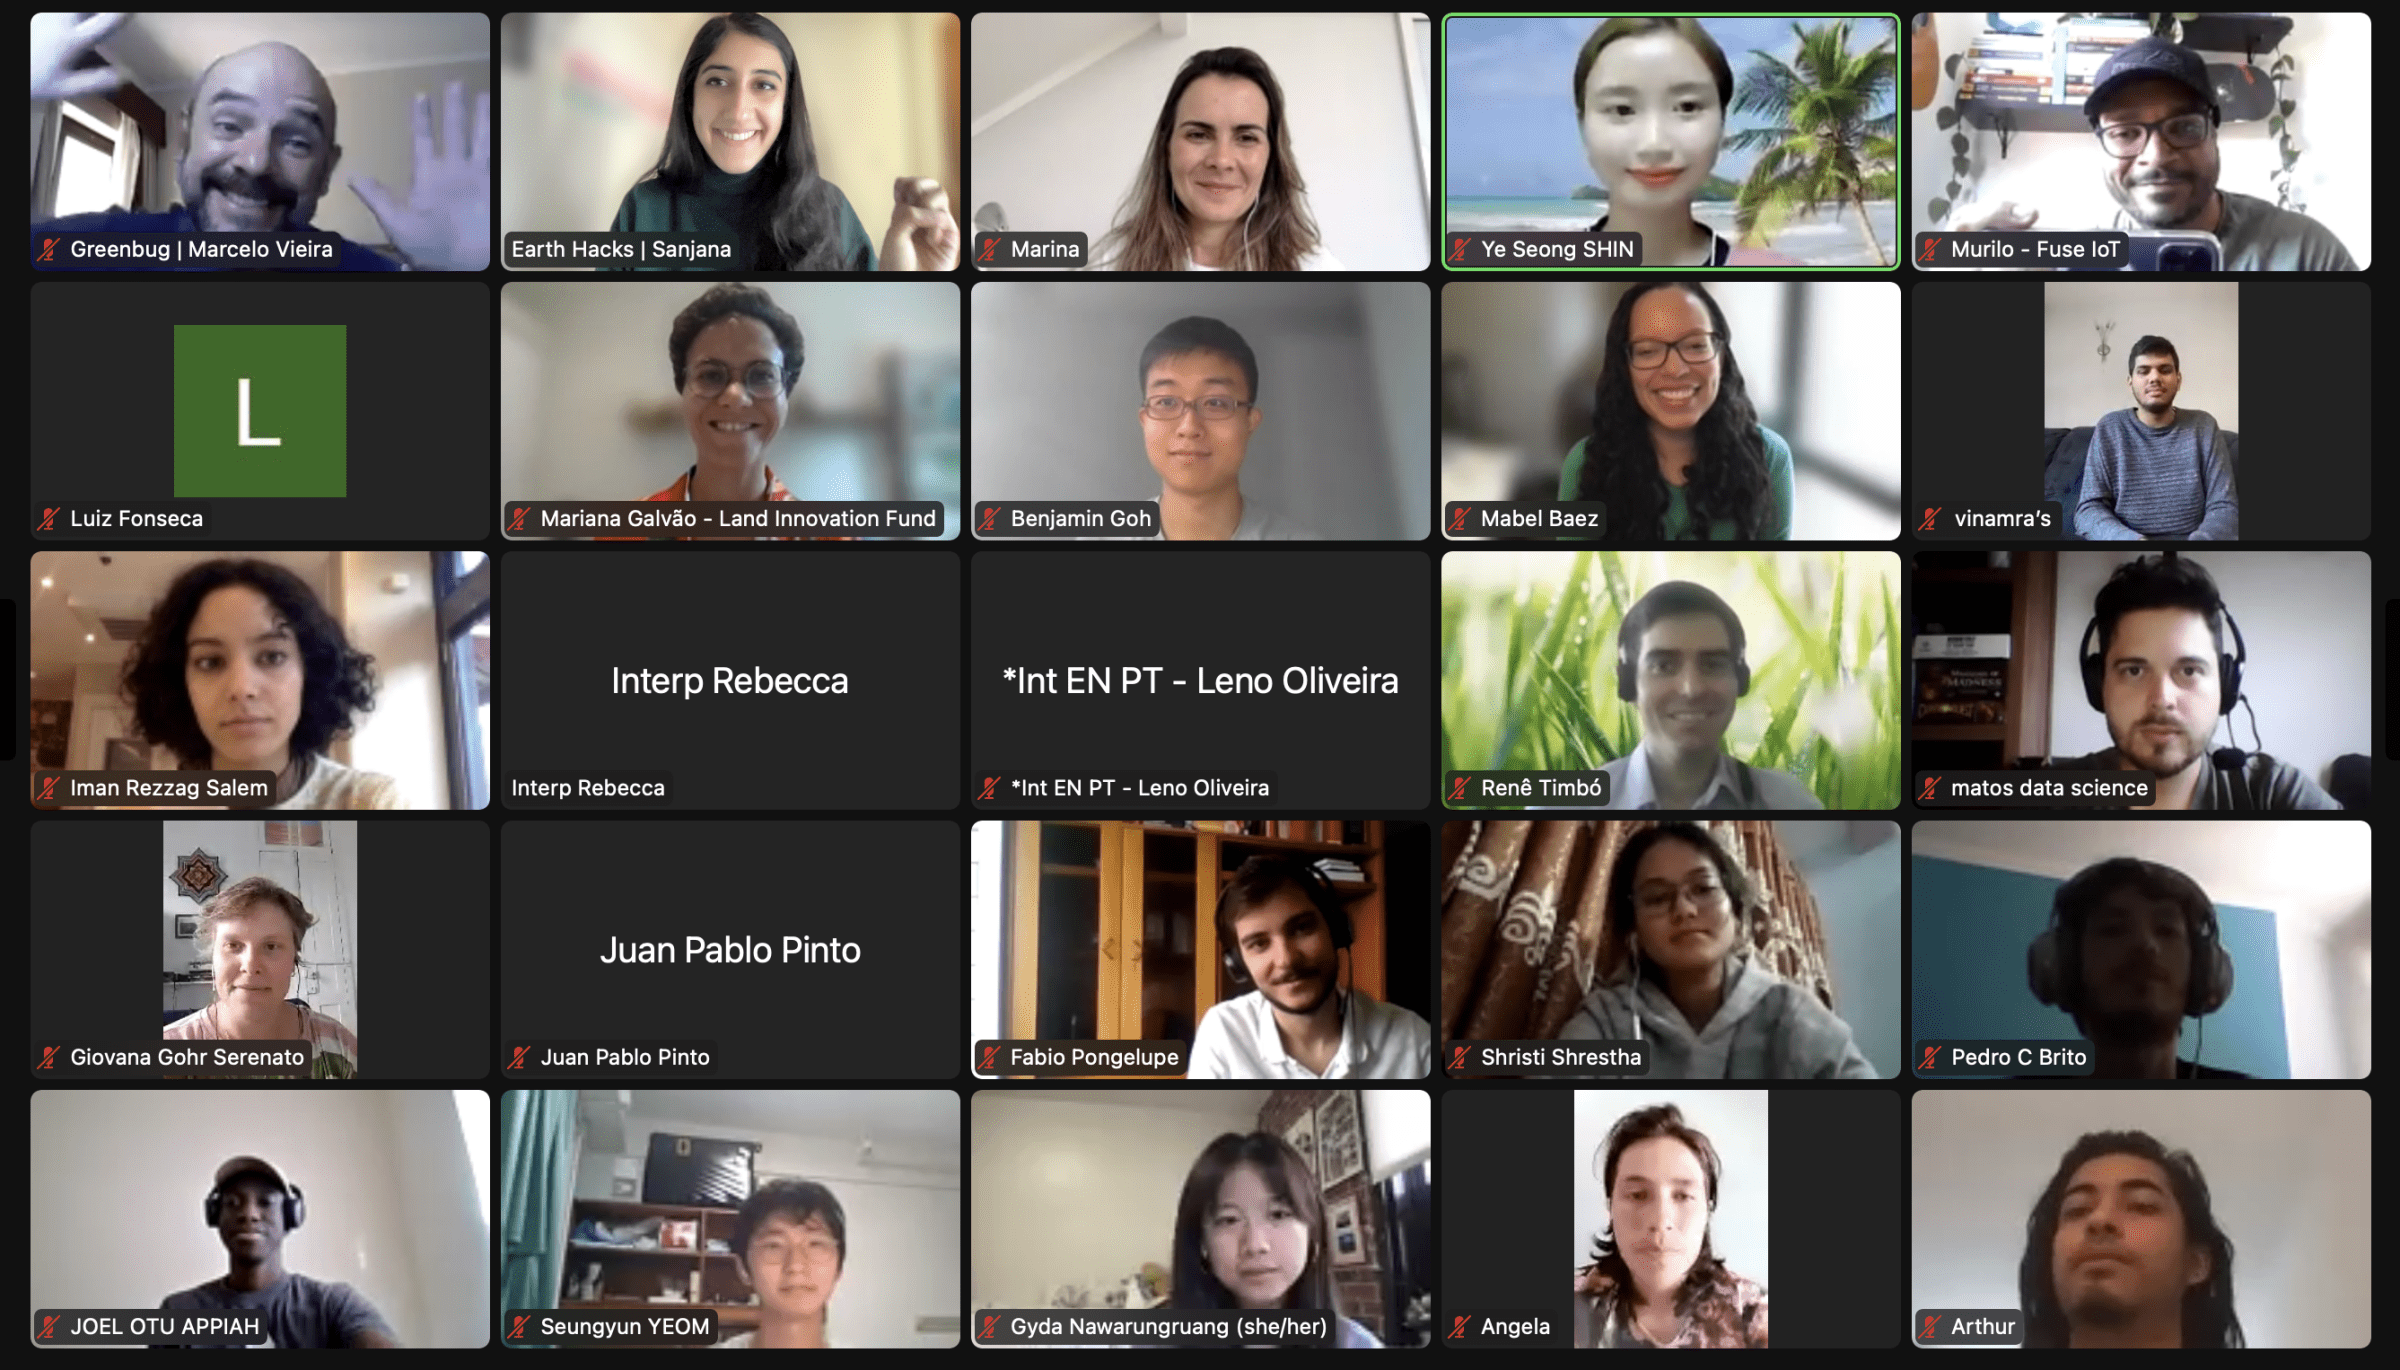 A group screenshot of the finalists, organizers, and mentors at #AmazoniaHack, a bilingual, virtual hardware hackathon to combat deforestation in the Amazon Rainforest.